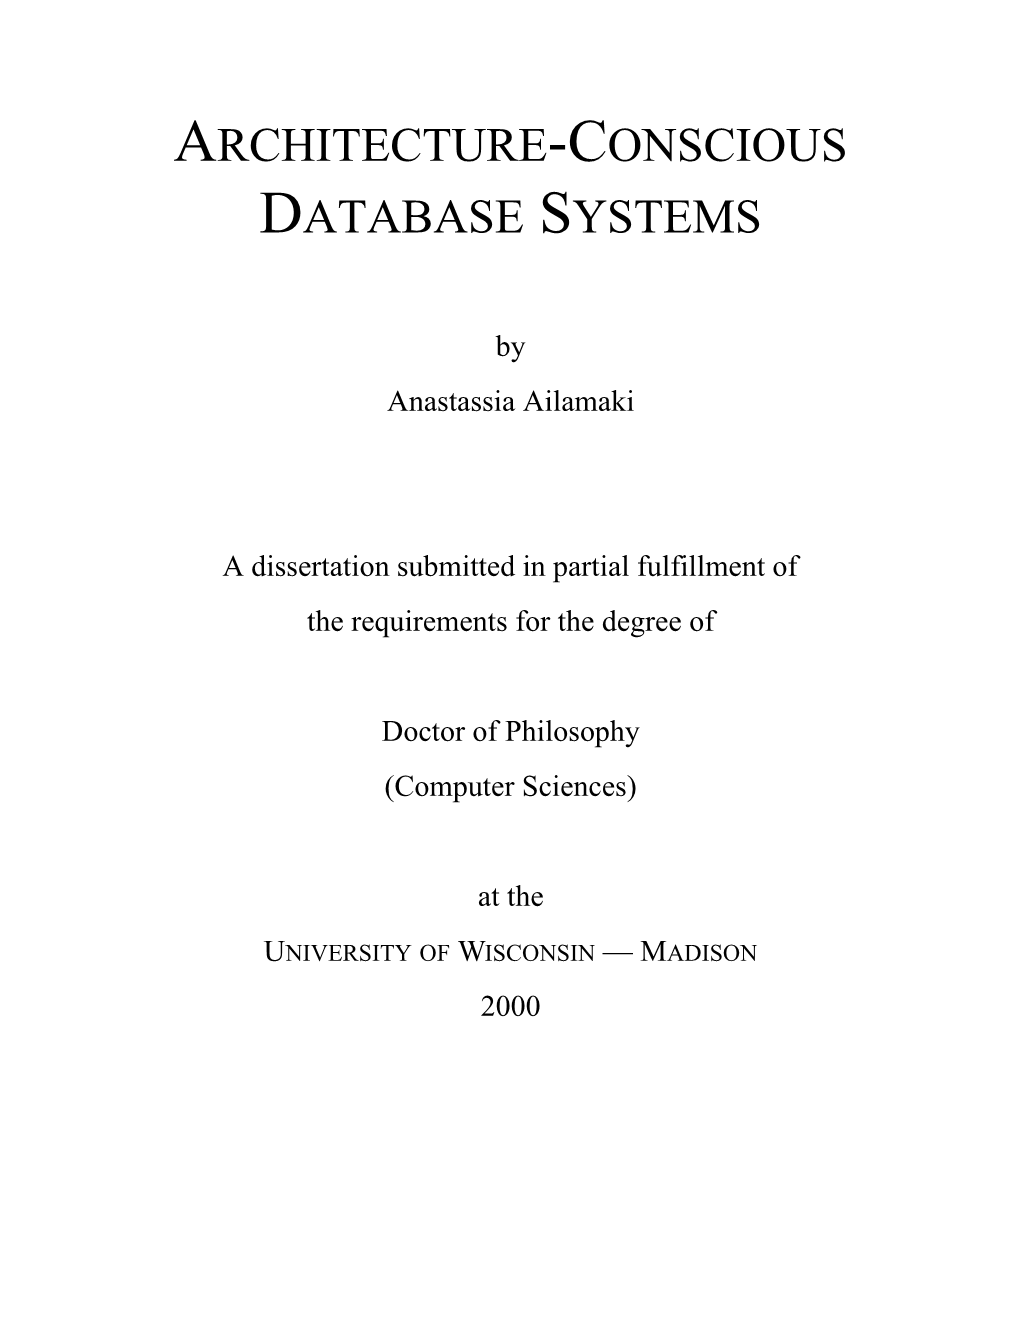 Architecture-Conscious Database Systems